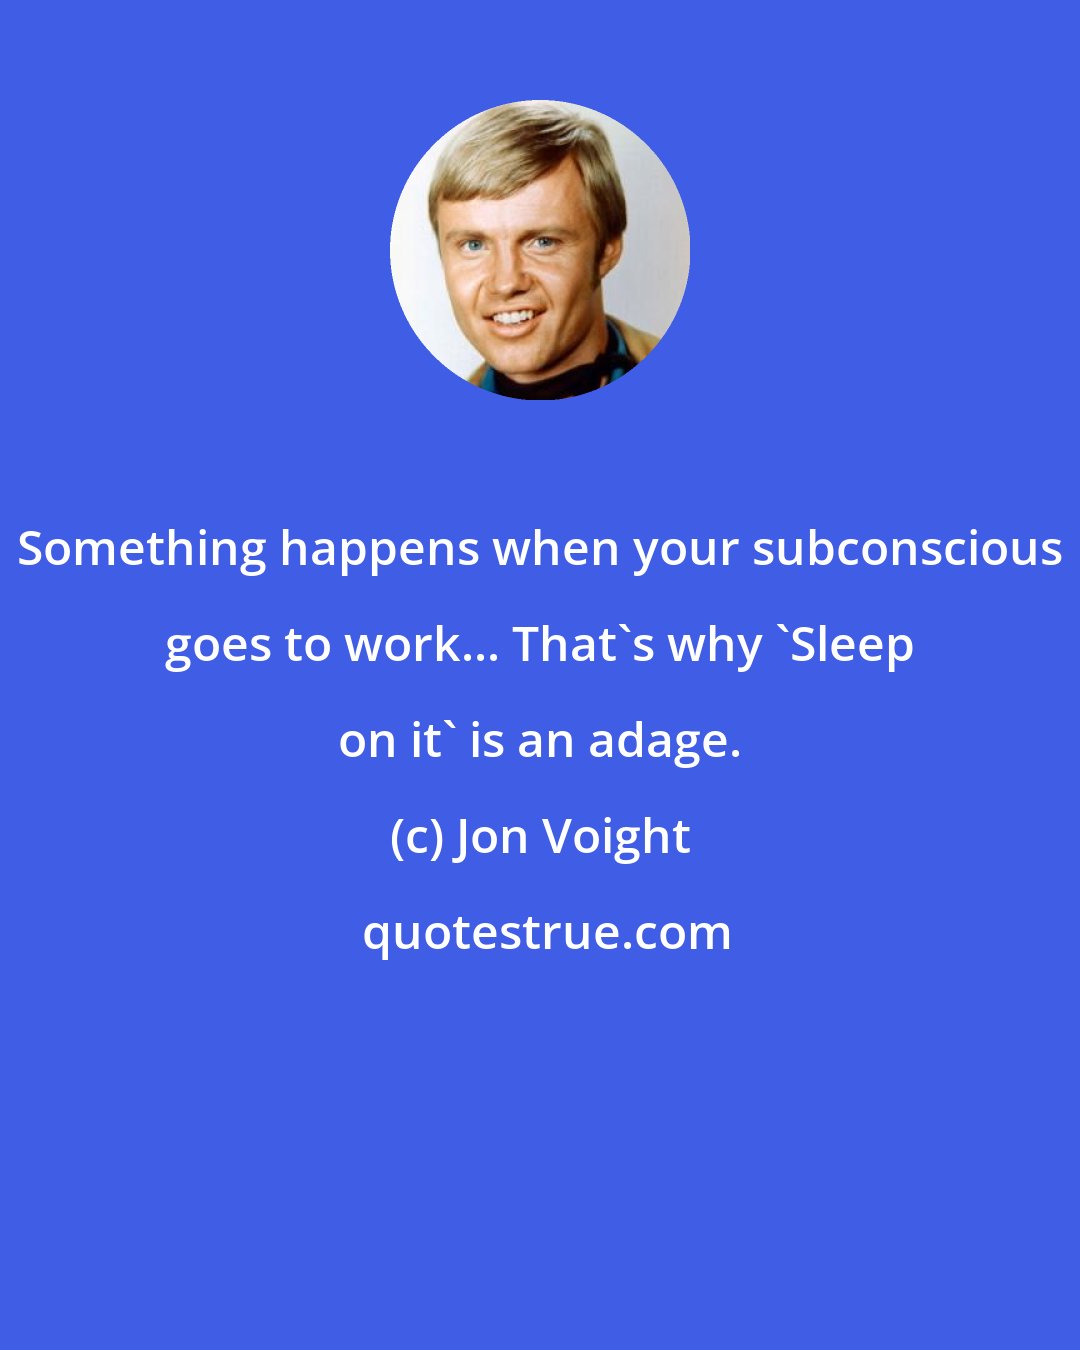 Jon Voight: Something happens when your subconscious goes to work... That's why 'Sleep on it' is an adage.